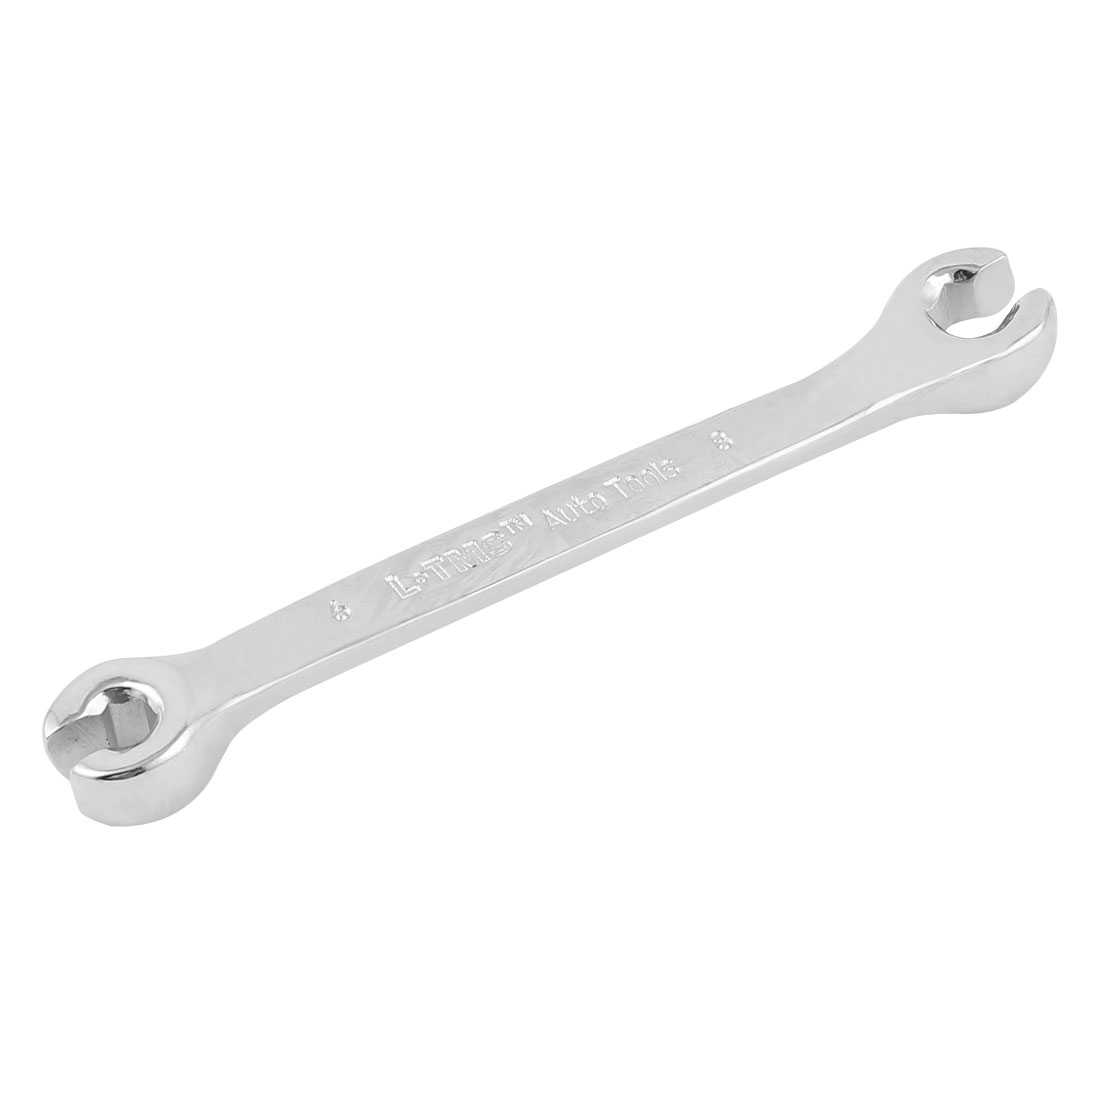 Unique Bargains Auto Car Tool Double Ended CR-V Flare Nut Wrench 6mm x 8mm